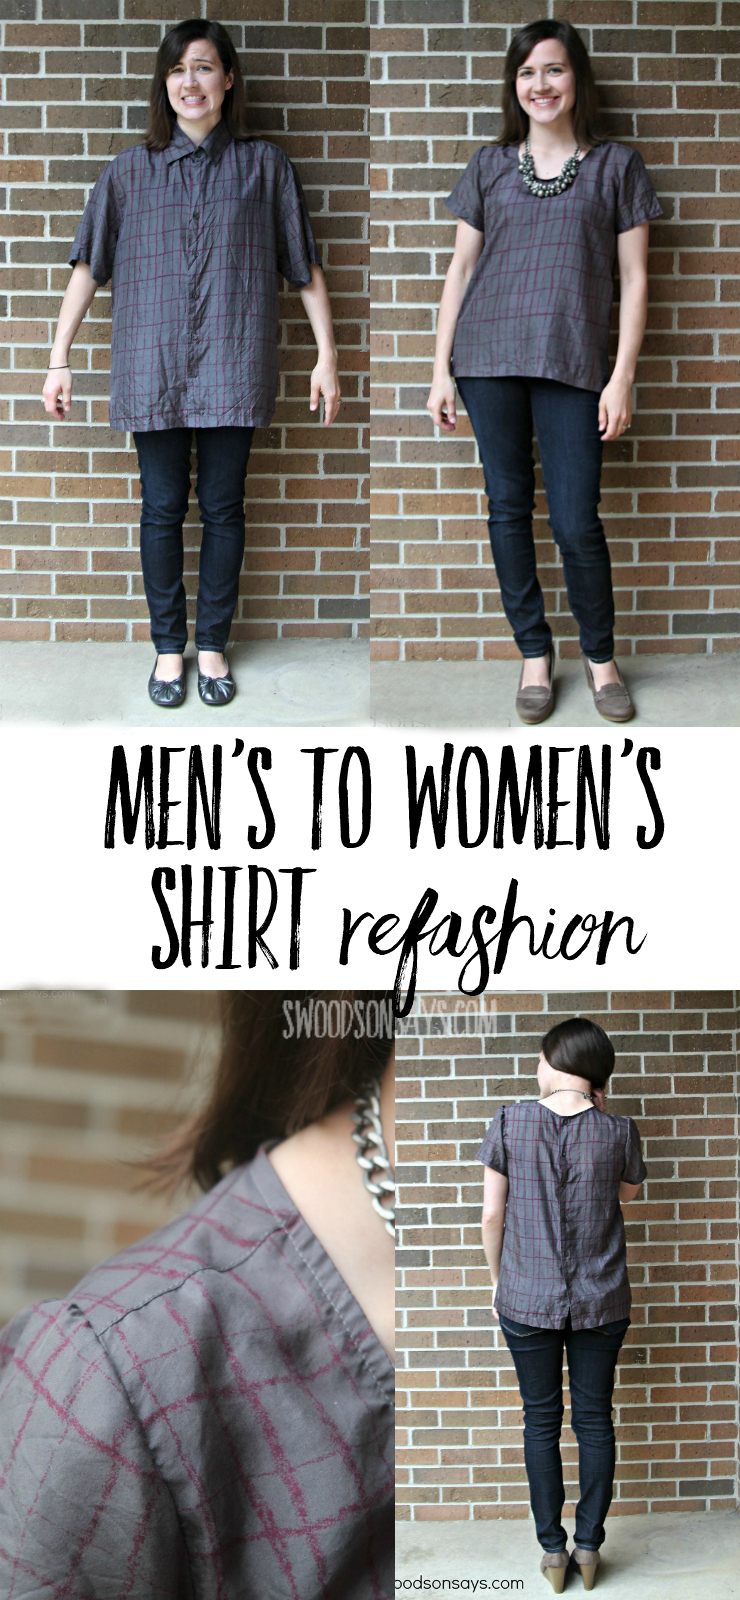  Unique Men's Shirt to women's shirt refashion from Swoodson Says - get inspired for how to turn a baggy mens shirt into a chic women's top! This creative refashion upcycles a button up shirt with a few simple steps. #refashion